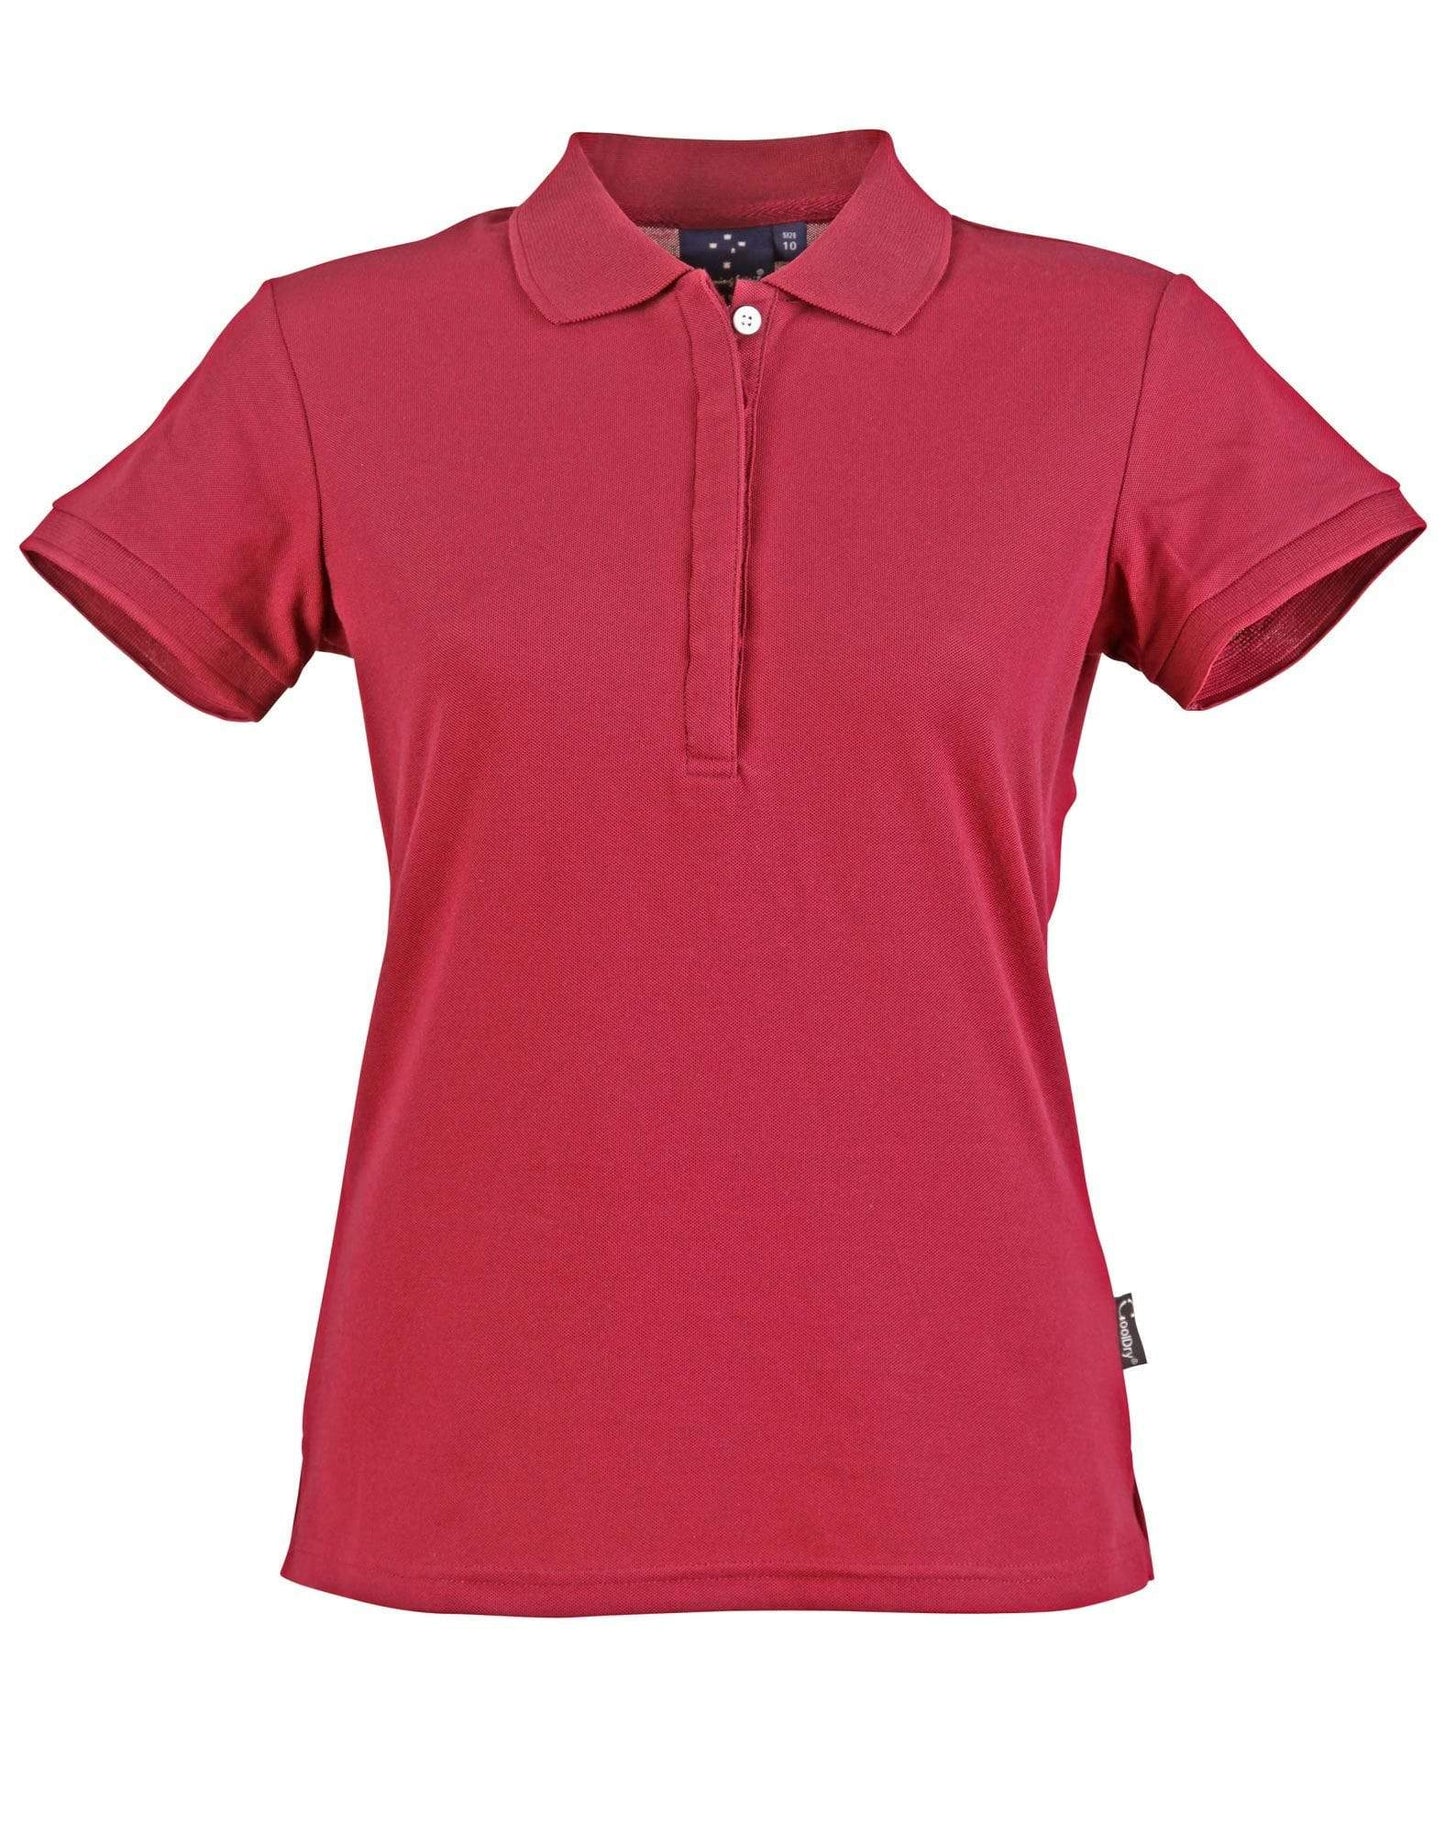 Connection Polo Ladies' Ps64 Casual Wear Winning Spirit Maroon 8 